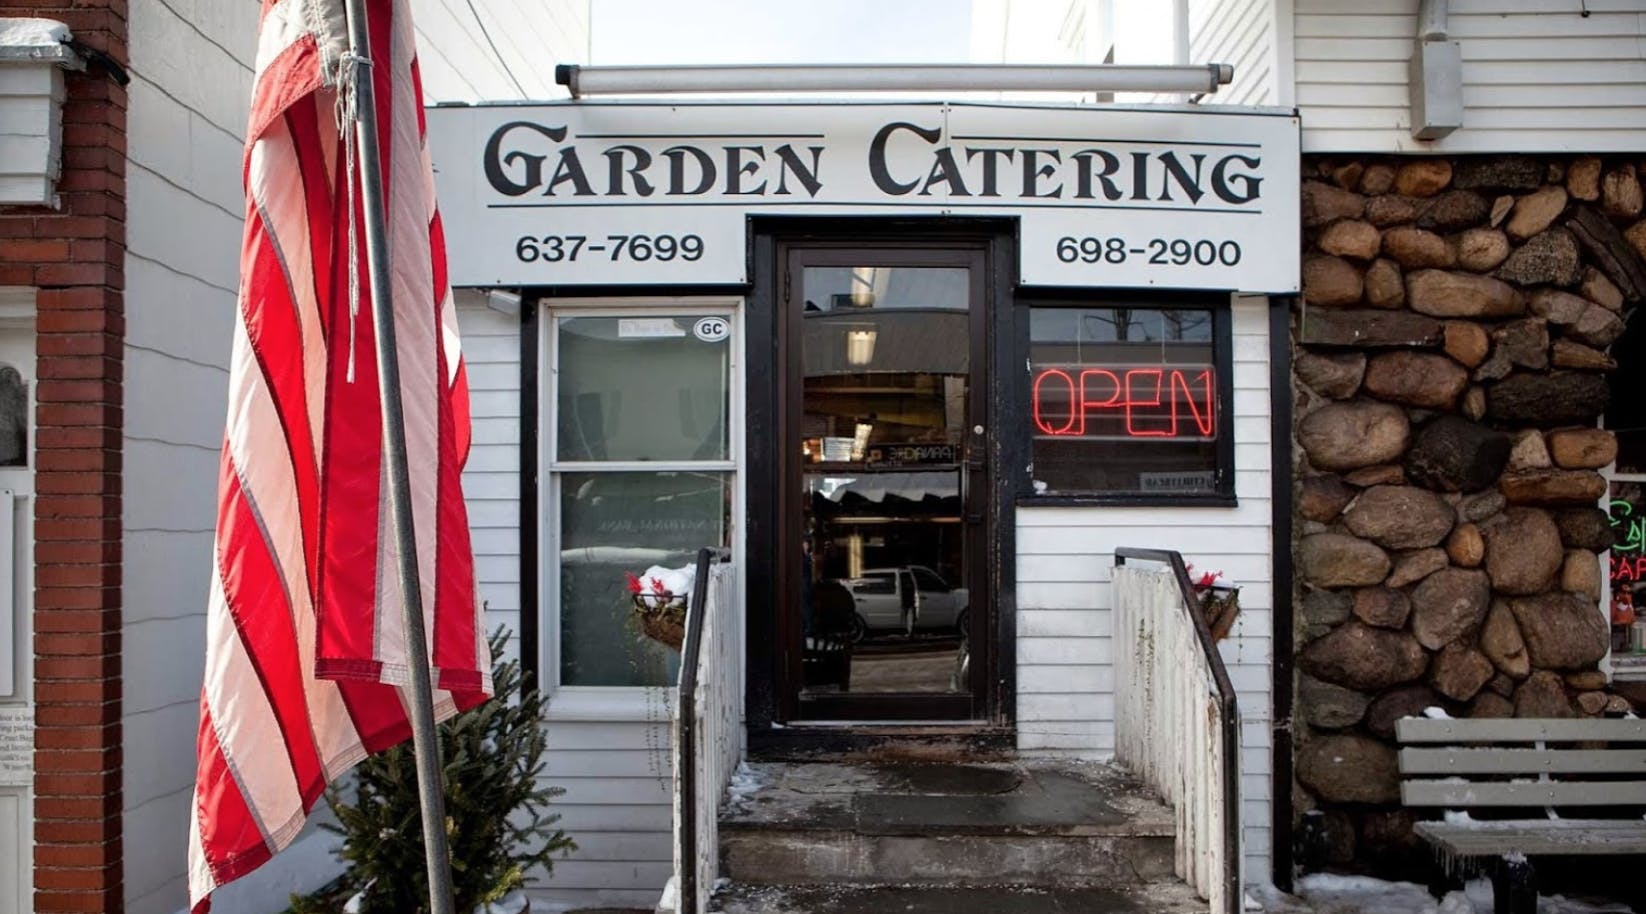 Fairfield Hours Location Garden Catering The Best Nuggets You Ll Ever Have Locations In Ct Ny